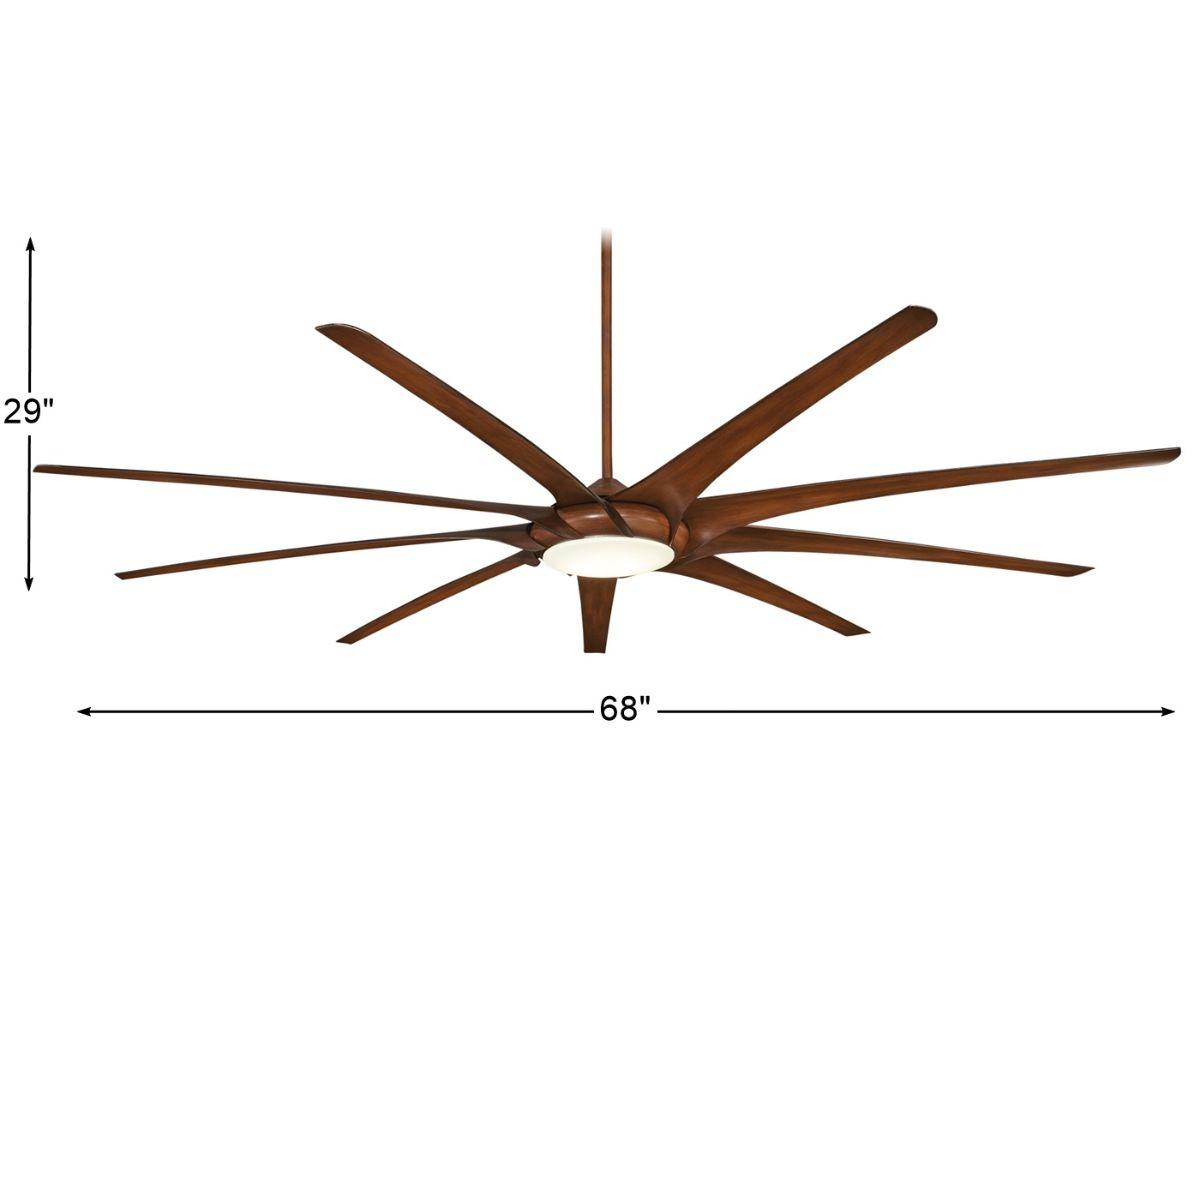 Cristafano 68 Inch Ceiling Fan With Light, Belcaro Walnut Finish, Wall Control Included